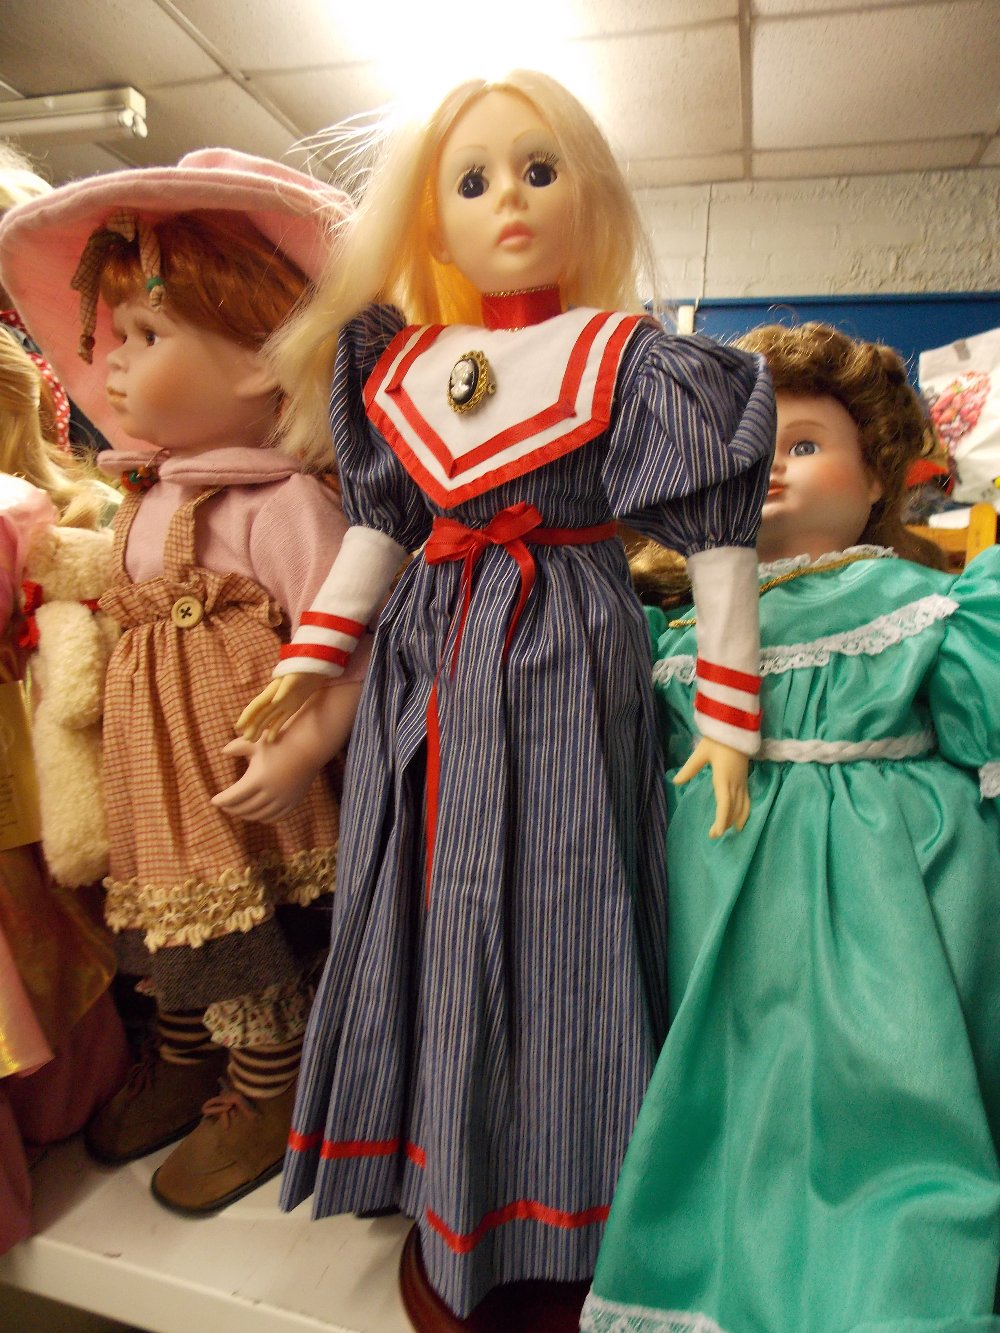 THIRTEEN TWENTIETH CENTURY PERIOD DRESS DOLLS WITH PORCELAIN AND PLASTIC HEADS BY ALBERON - Image 2 of 6